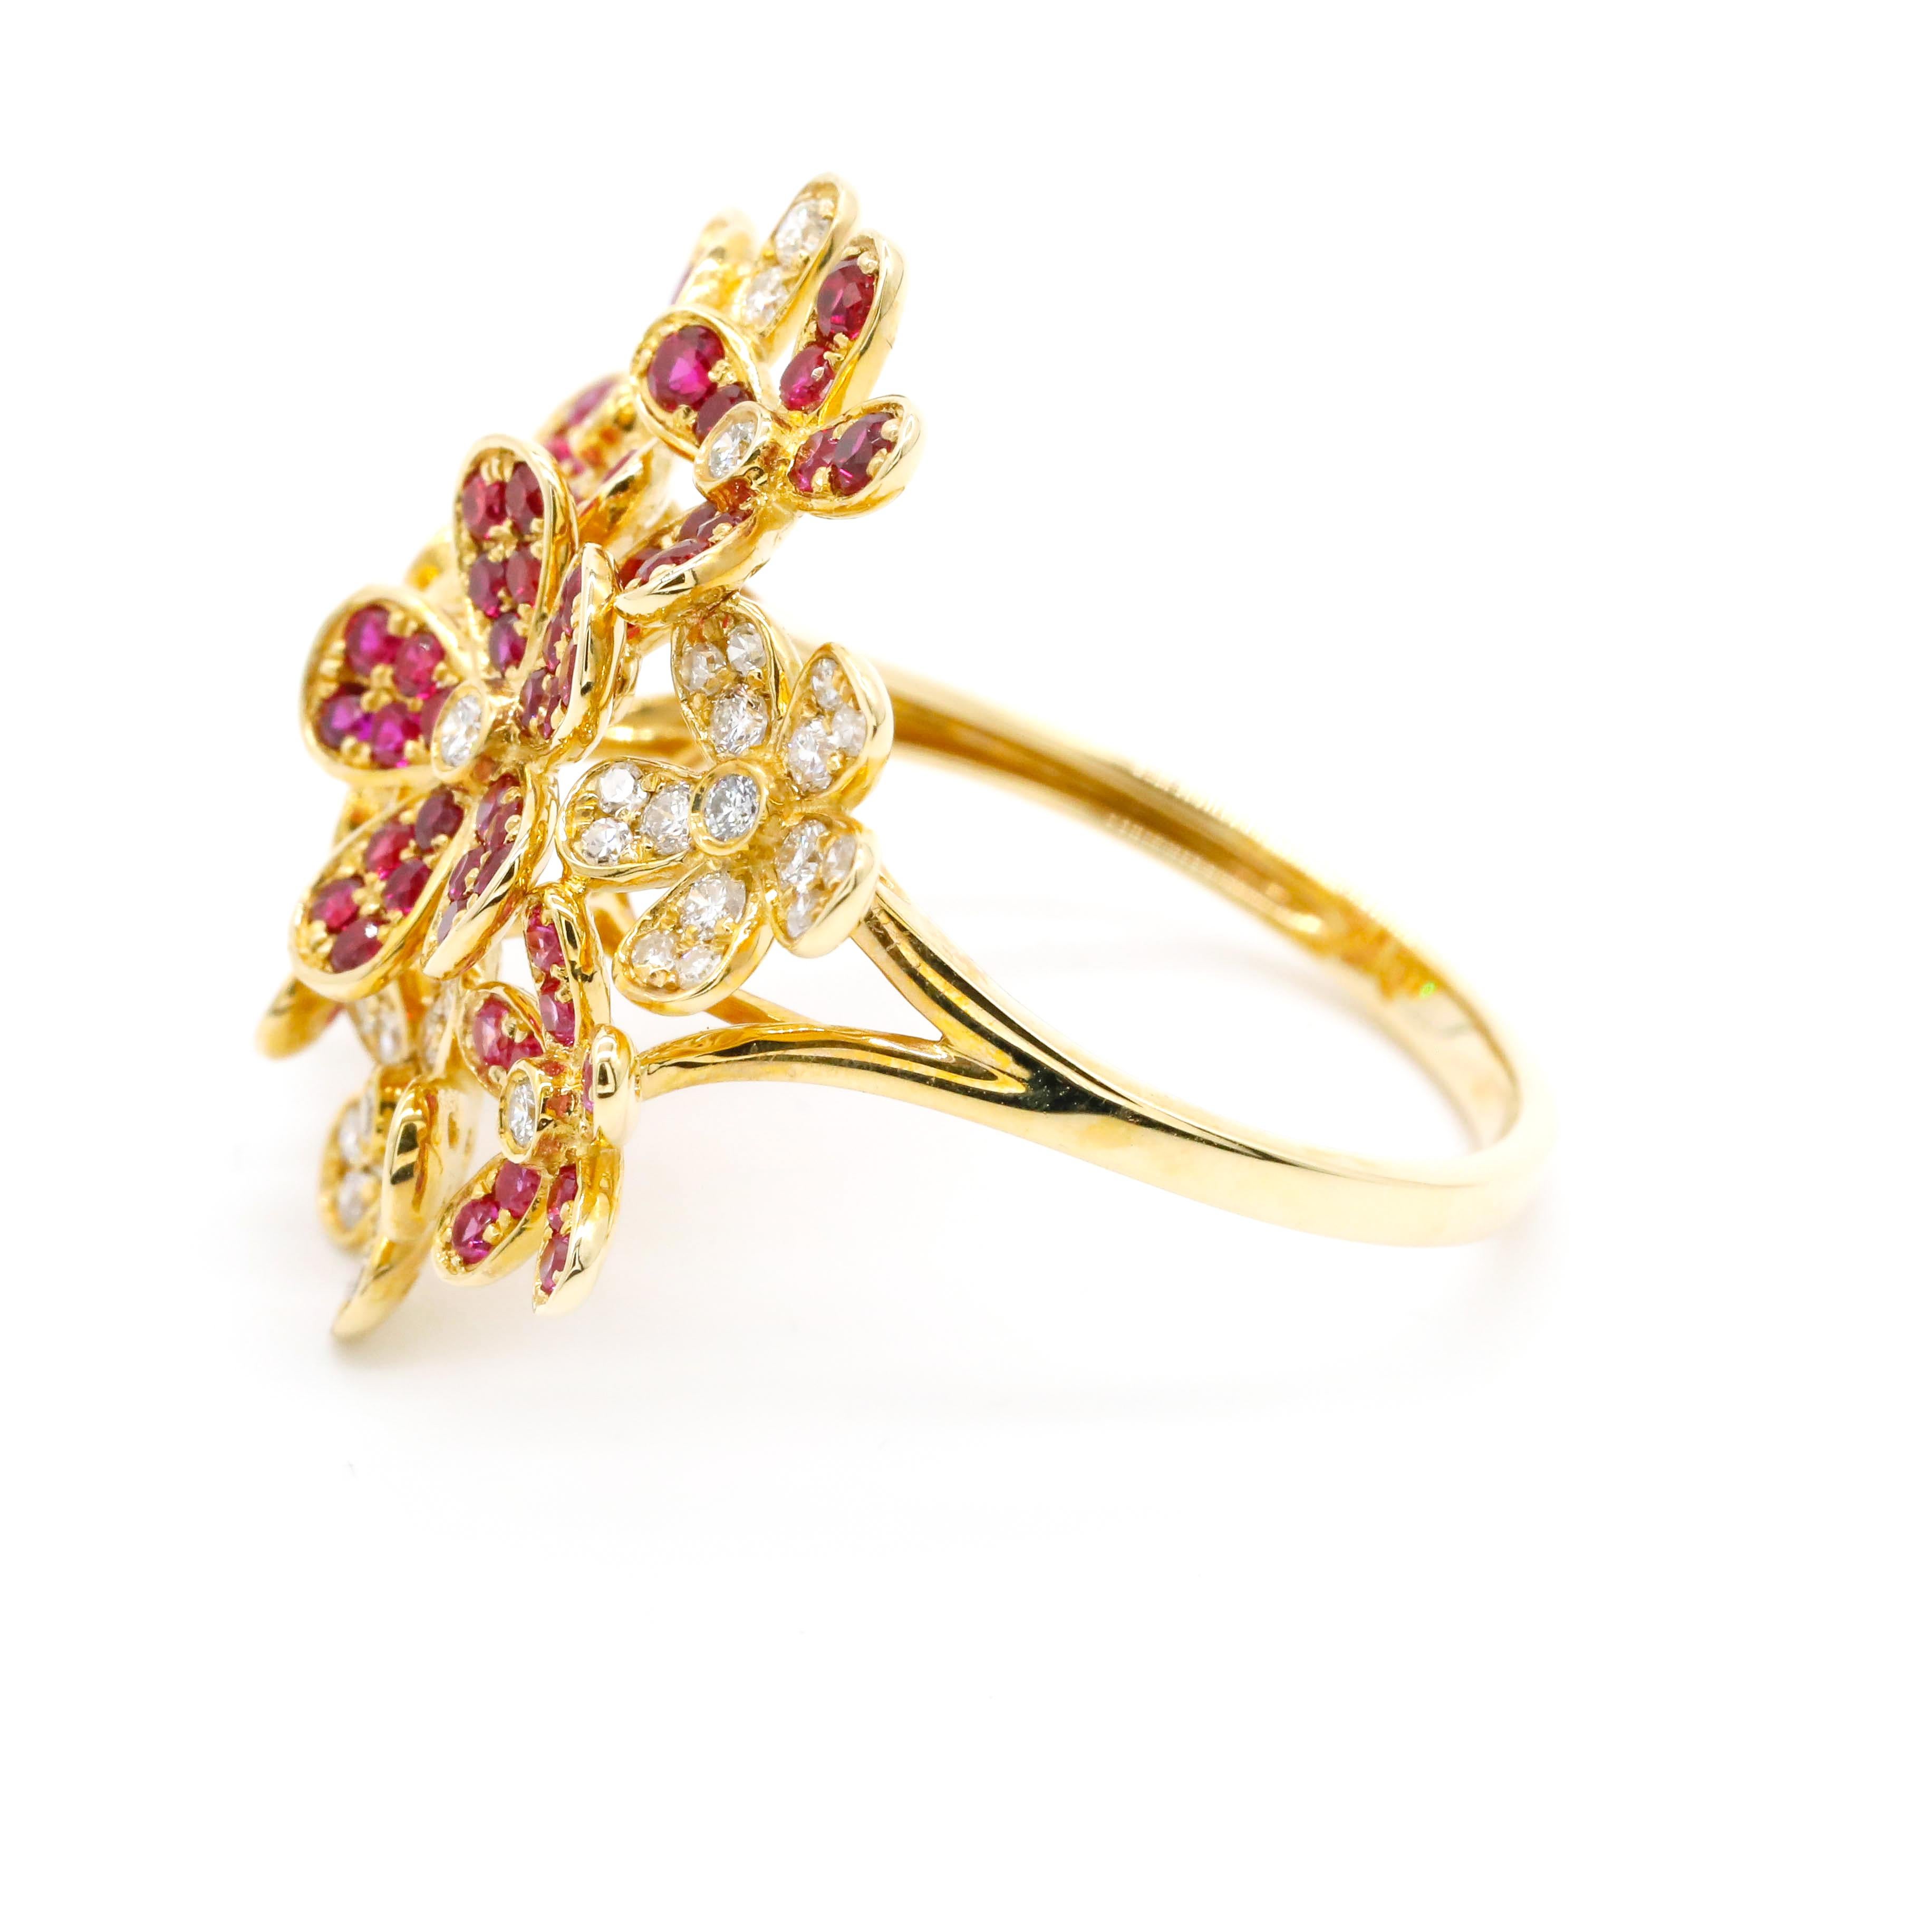 1.69 Ct Diamond Ruby Pink Sapphire Diamond Pave Flower 14K Yellow Gold Wrap Ring

This modern ring features a total of 0.44 carats of diamond round shape and 1.25 carats Pink Sapphire Gemstone Set in 14K Yellow Gold.

We guarantee all products sold